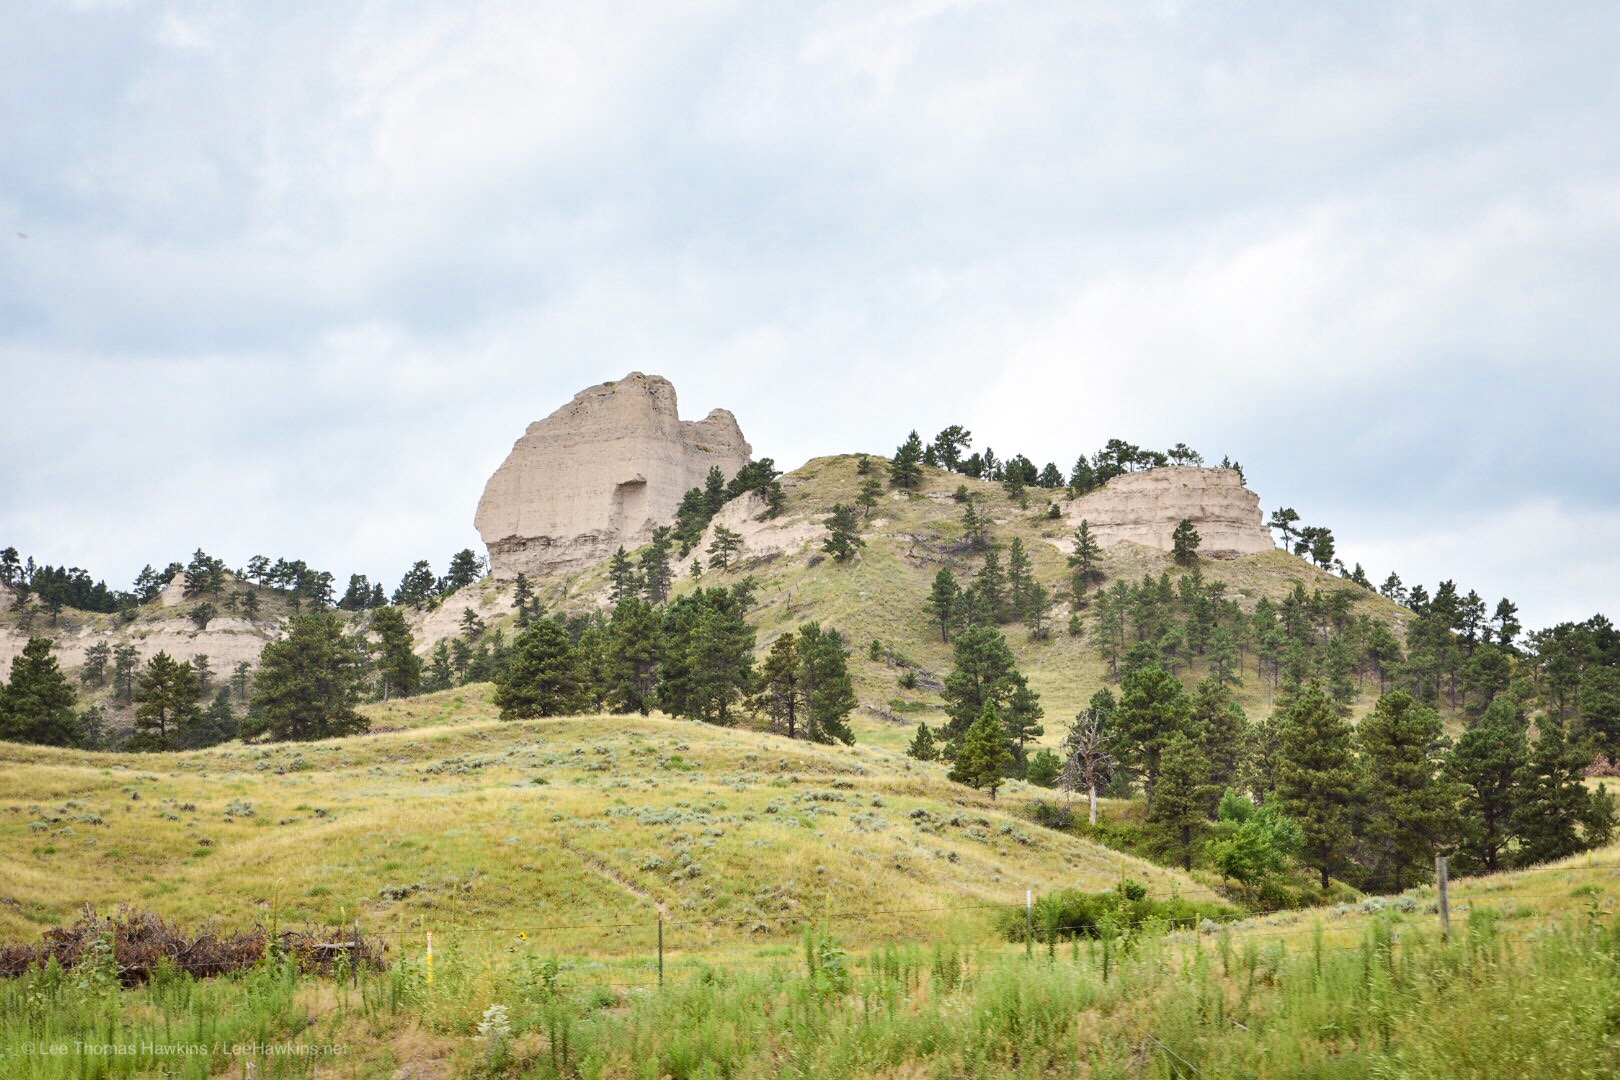 Light-colored hagged rocks crop out of the top of grassy buttes